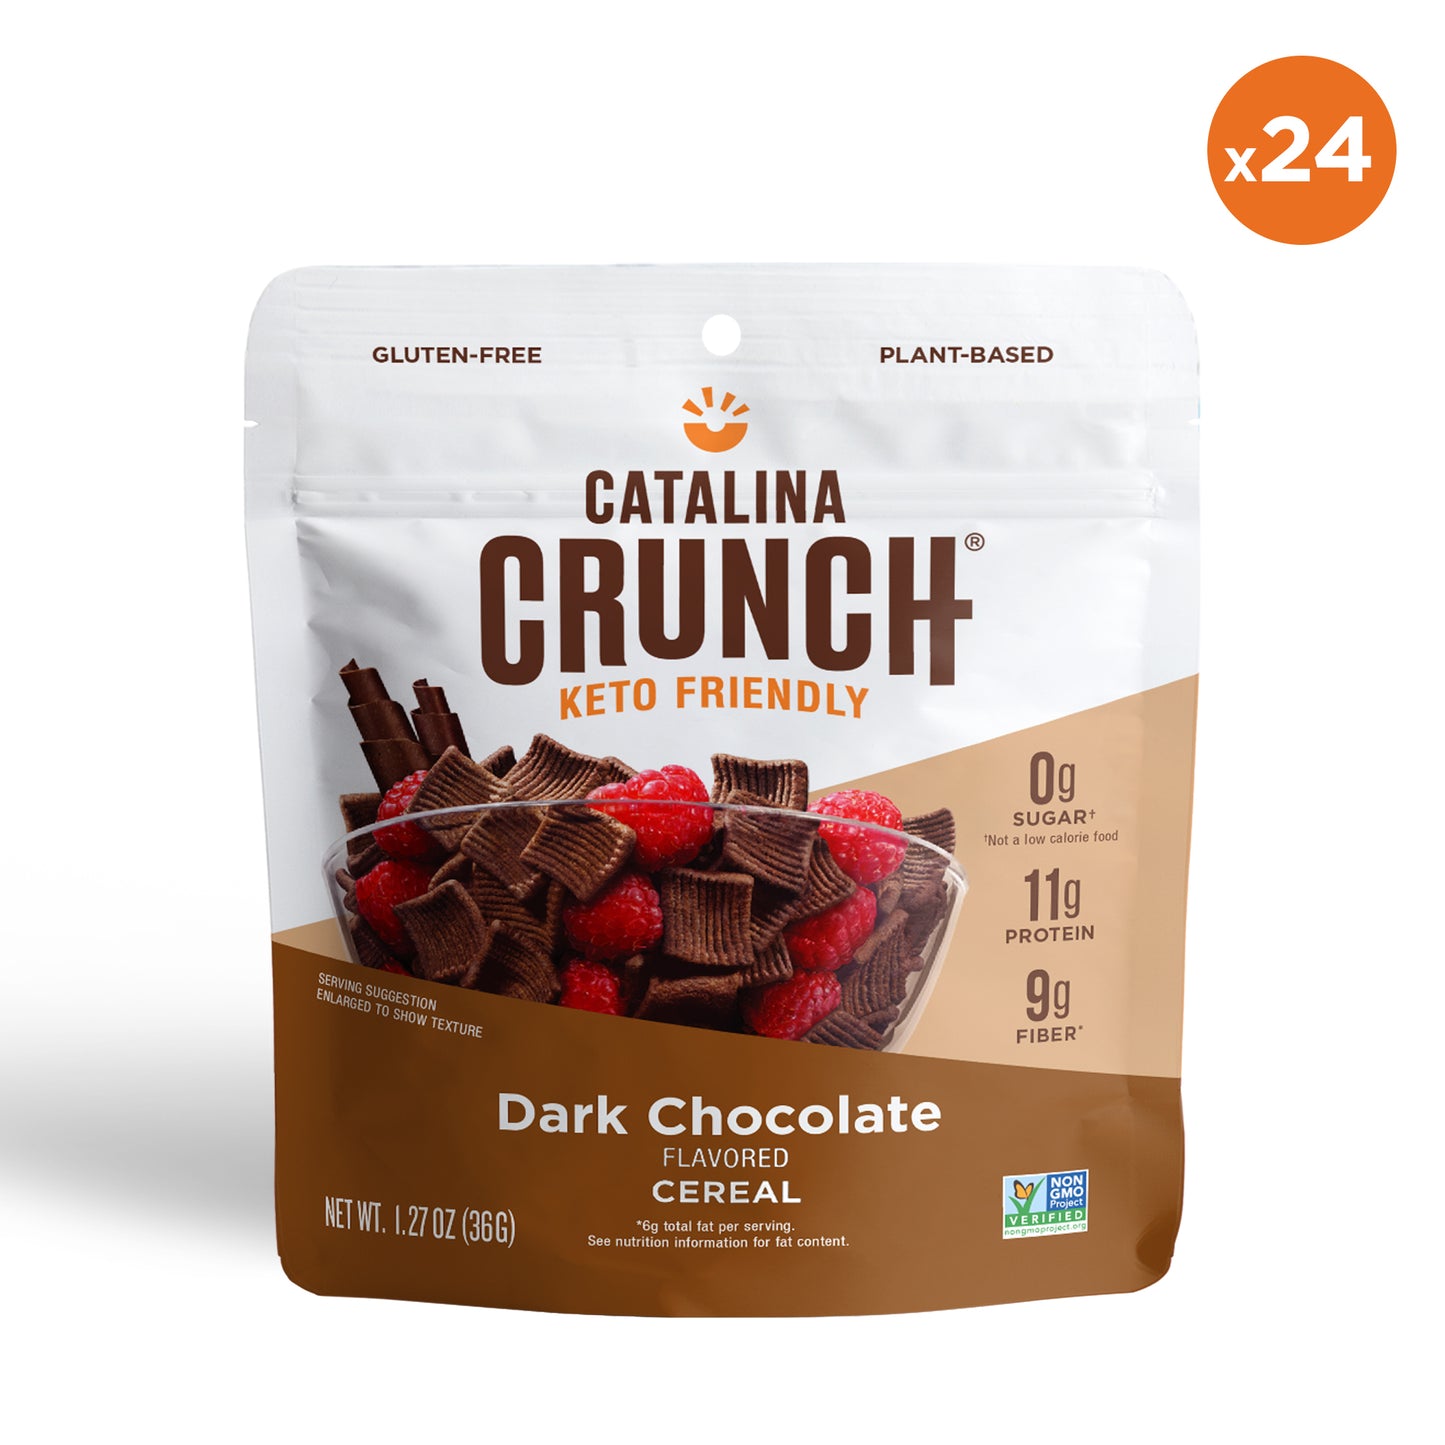 Single Serve Dark Chocolate Cereal 24-ct (2 POP Boxes of 12 - 1.27oz Pouches)